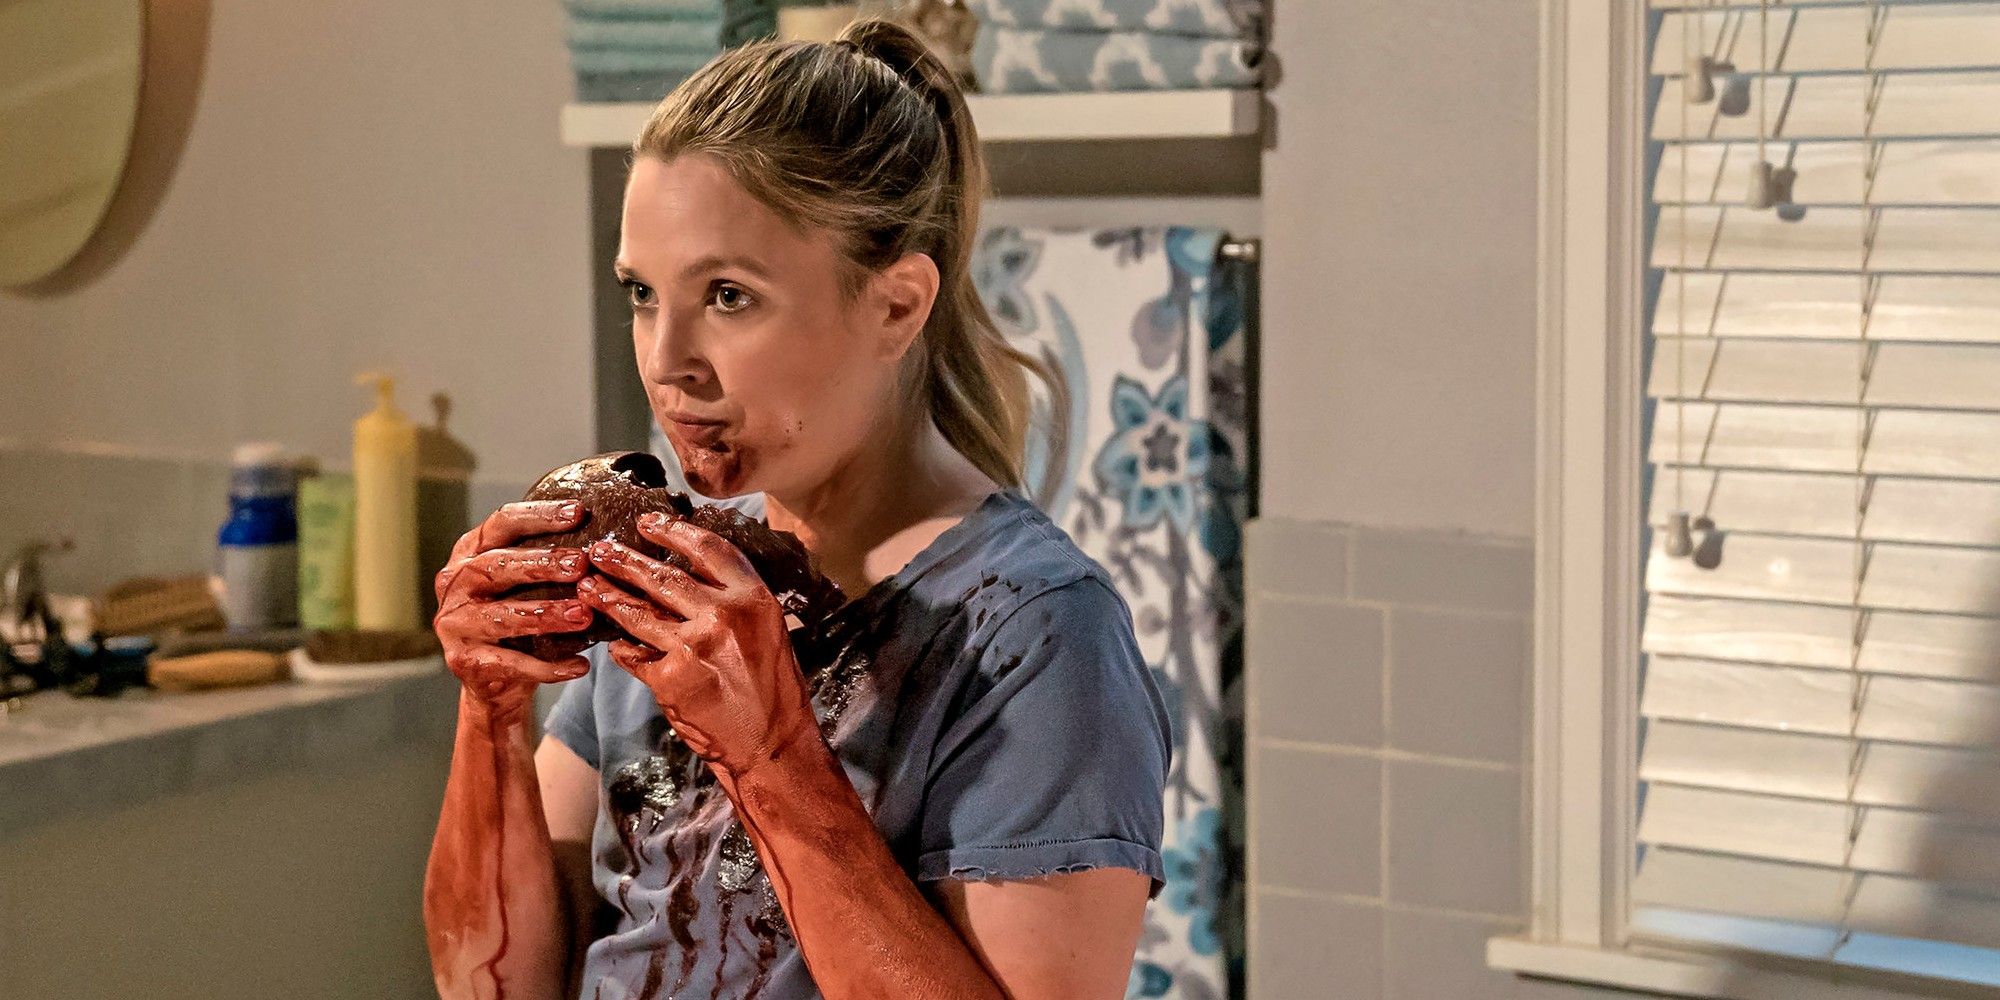 Drew Barrymore as Sheila Hammond eating one of her victims in Santa Clarita Diet 